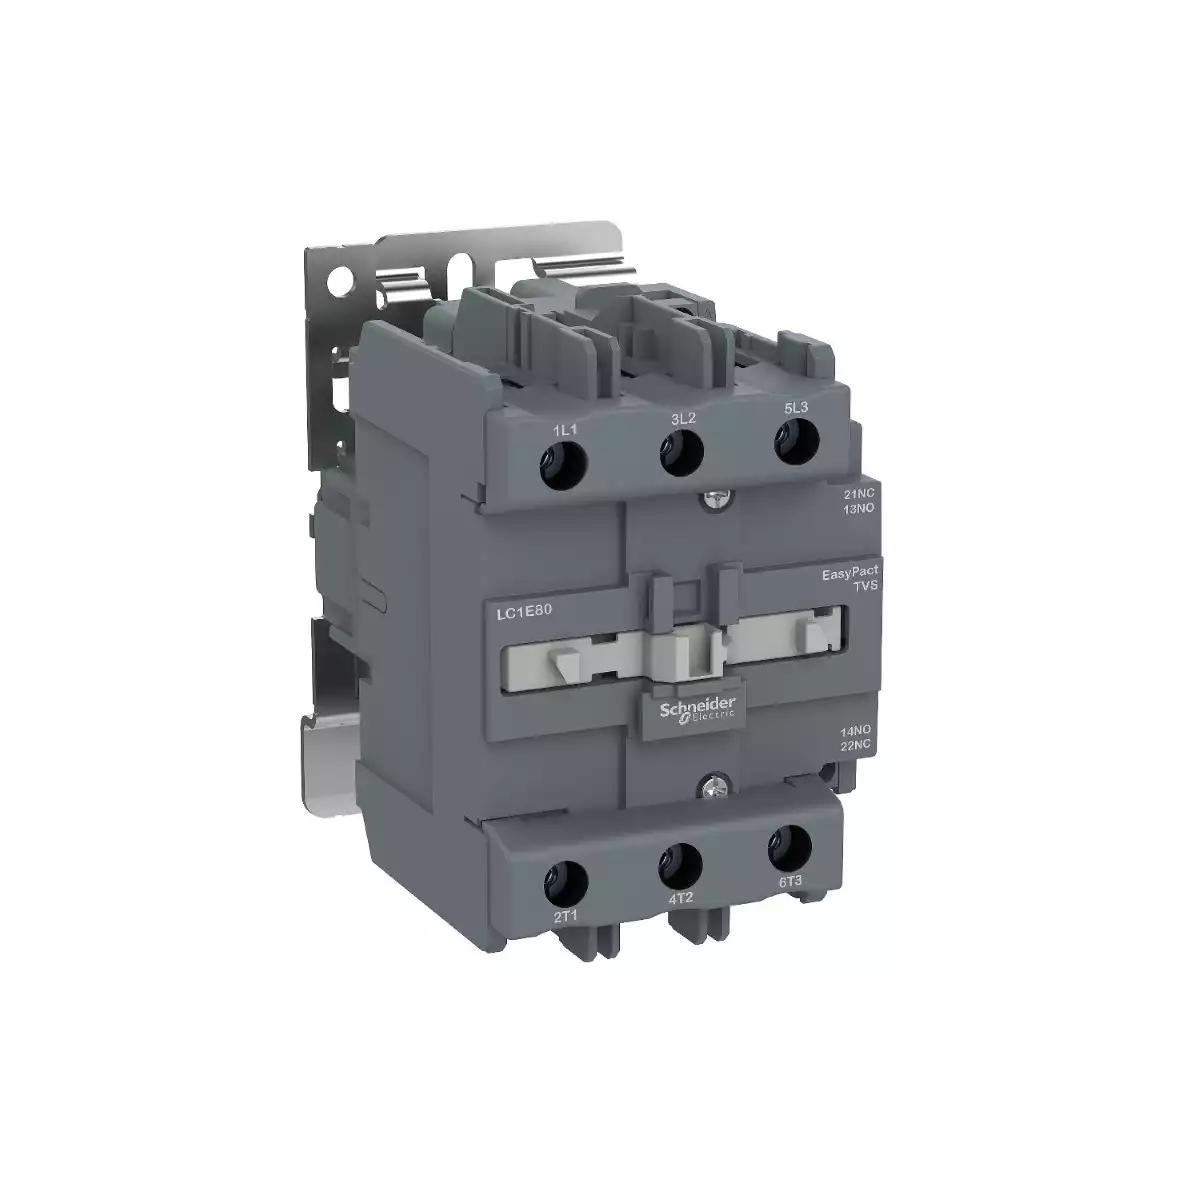 EasyPact TVS 3P CONTACTOR 400V 45KW AC3